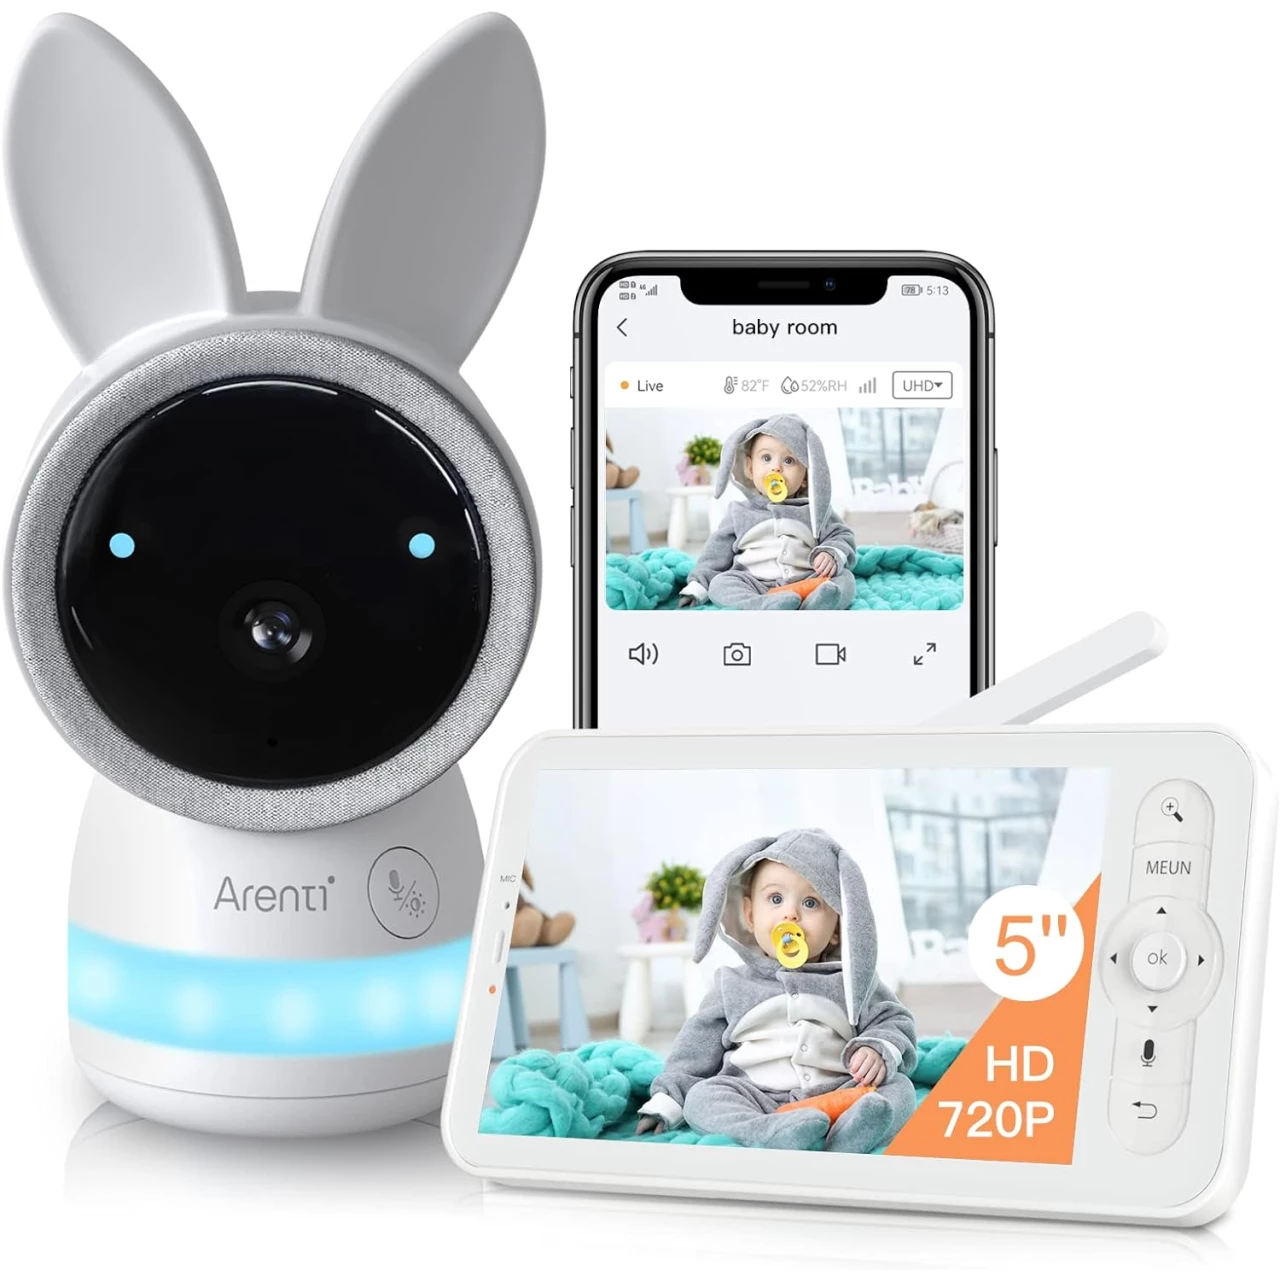 ARENTI Video Baby Monitor, Audio Monitor with 2K Ultra HD WiFi Camera,5&quot; Color Display,Night Vision,Lullabies,Cry Detection,Motion Detection,Temp &amp; Humidity Sensor,Two Way Talk,App Control(White)